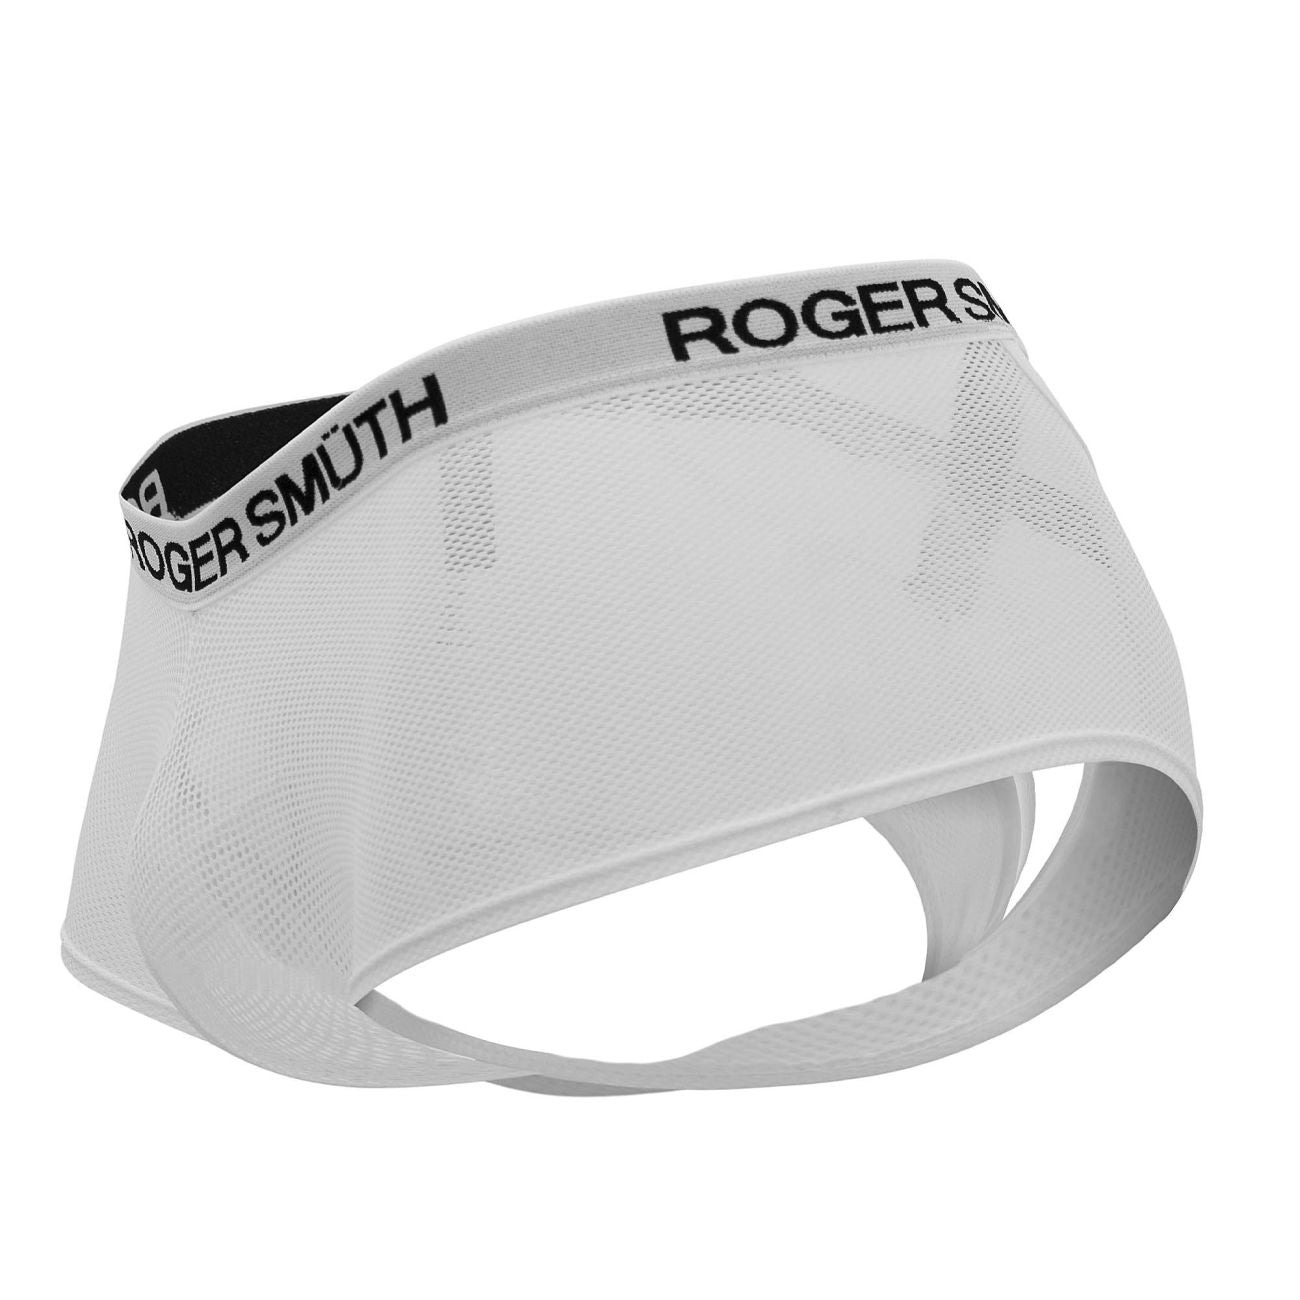 Roger Smuth RS062 Trunks White